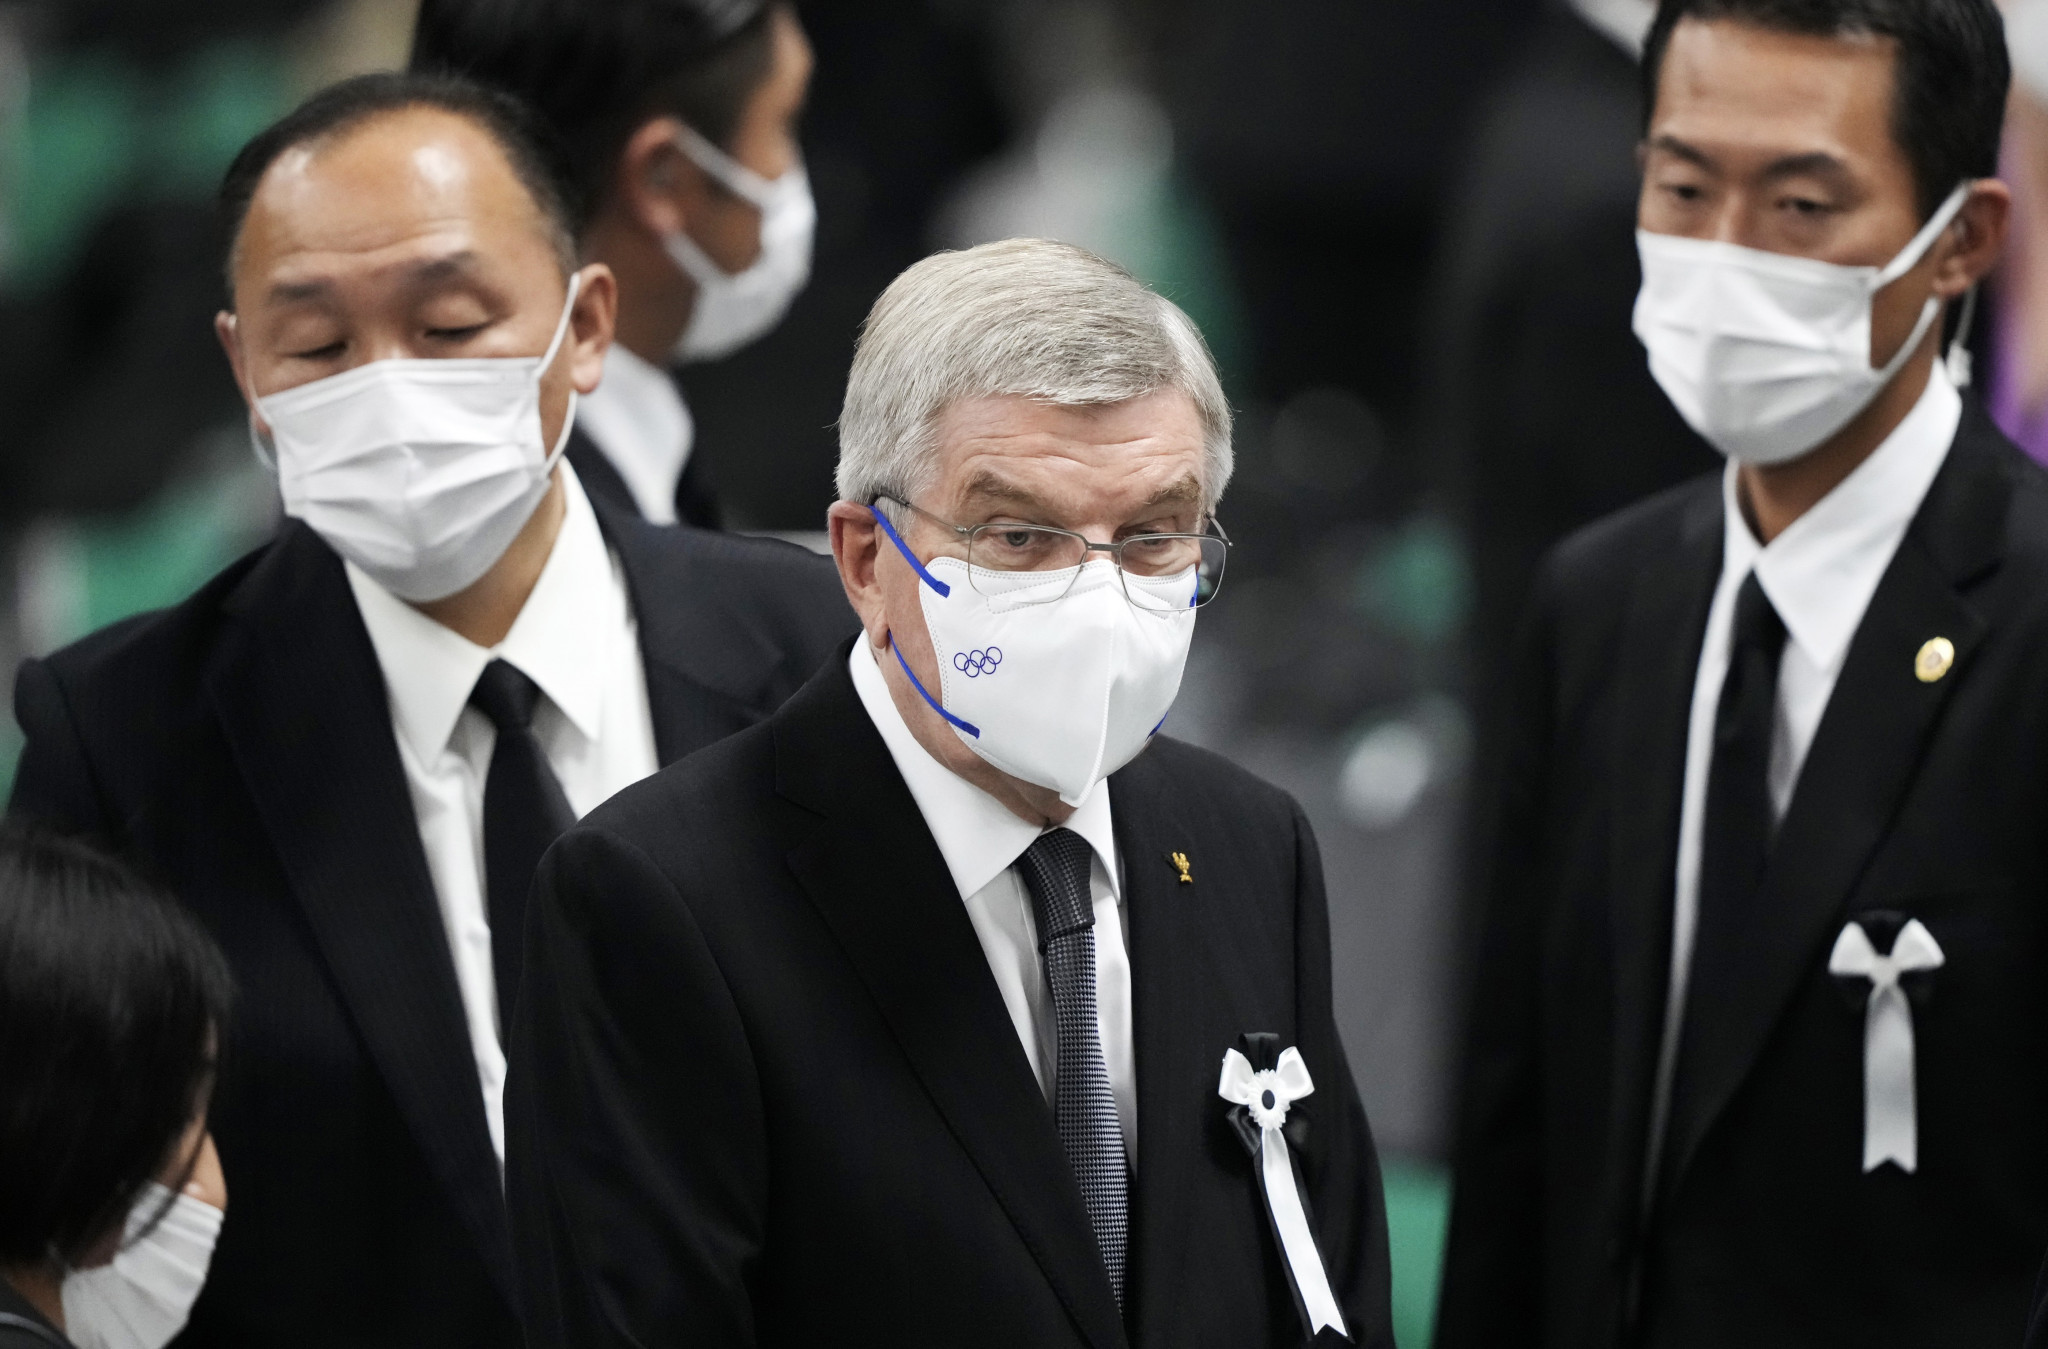 IOC President Thomas Bach has cancelled his plans to travel to Tokyo this month ©Getty Images